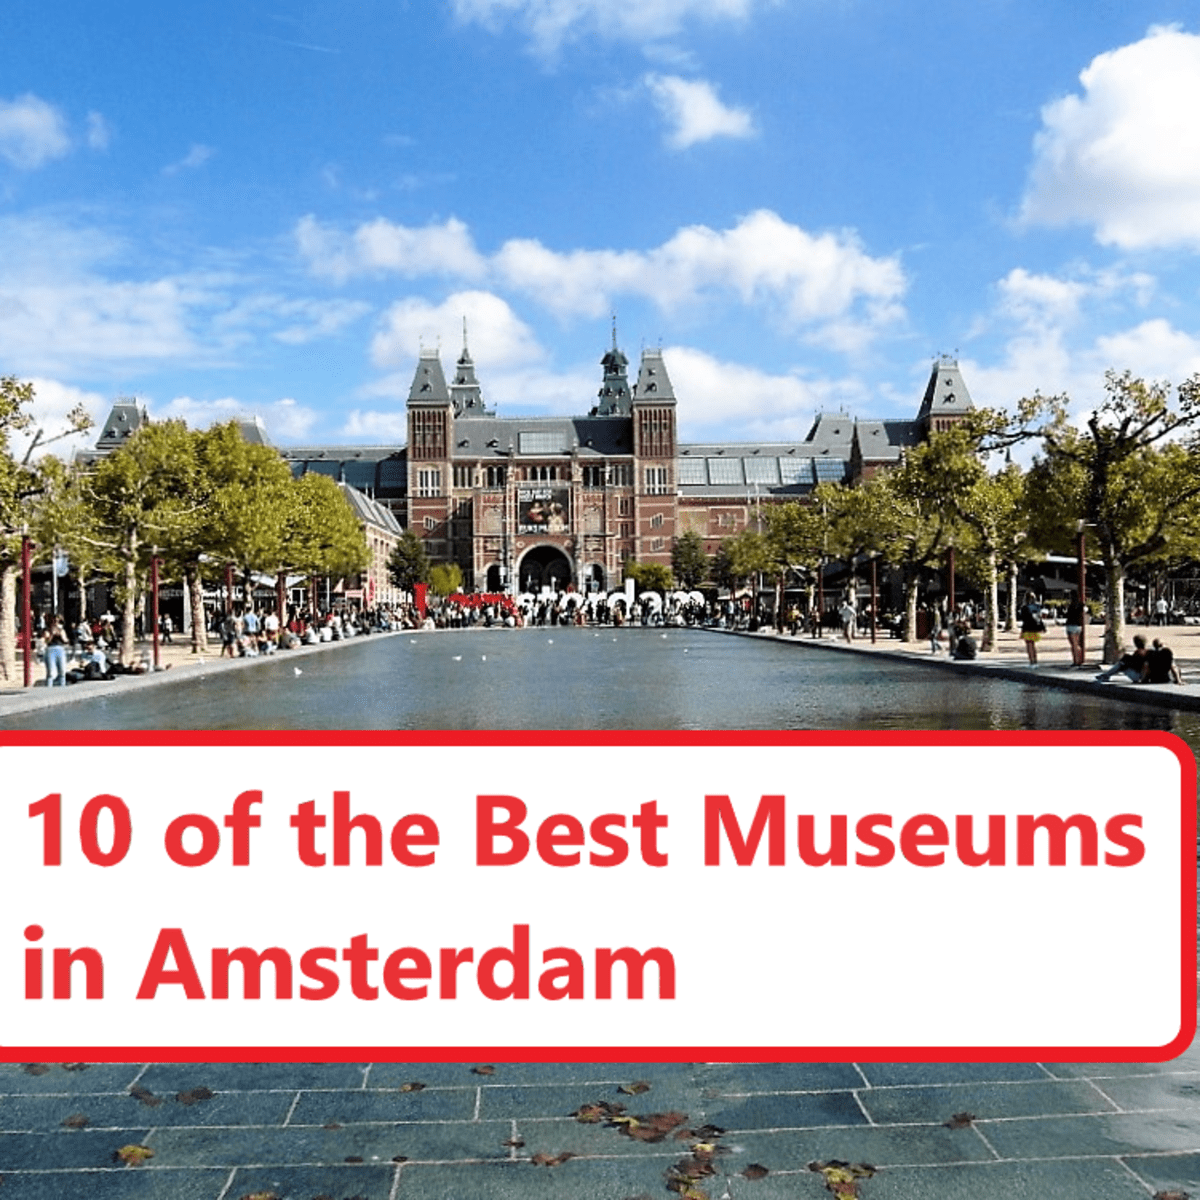 10 of the Best Museums in Amsterdam -